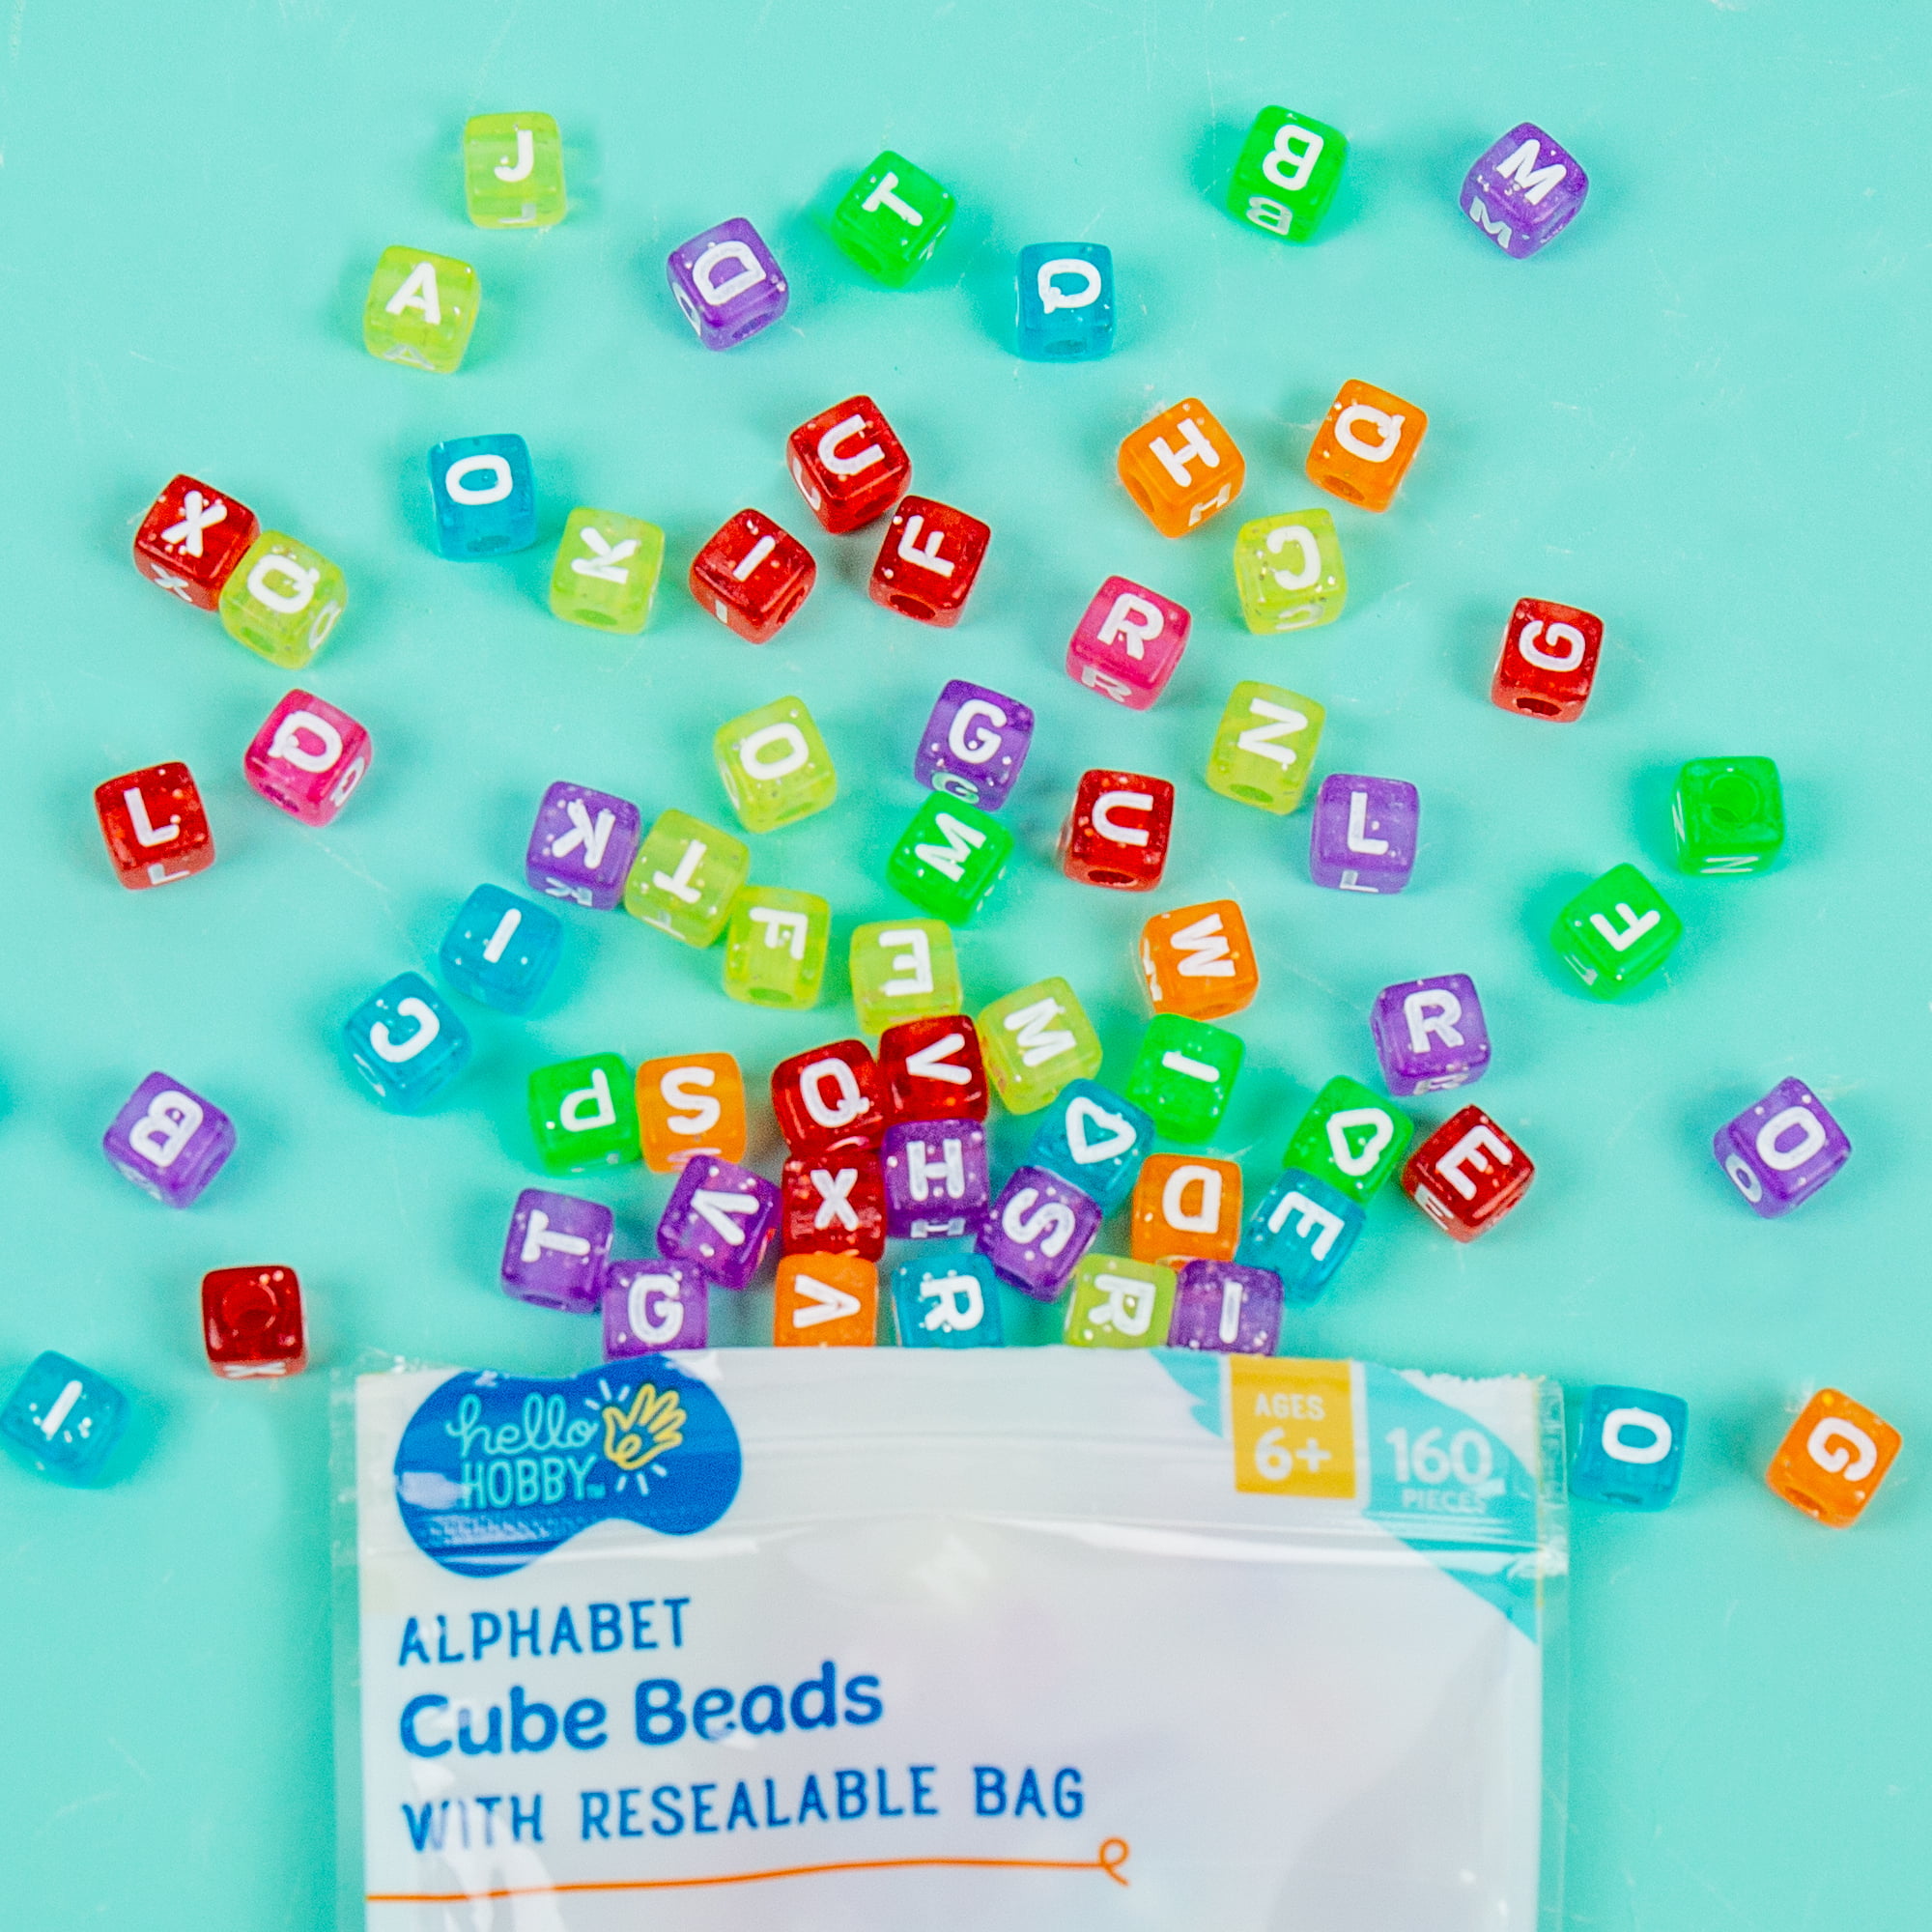 Hello Hobby Alphabet Cube Beads, Boys and Girls, Child, Ages 6+